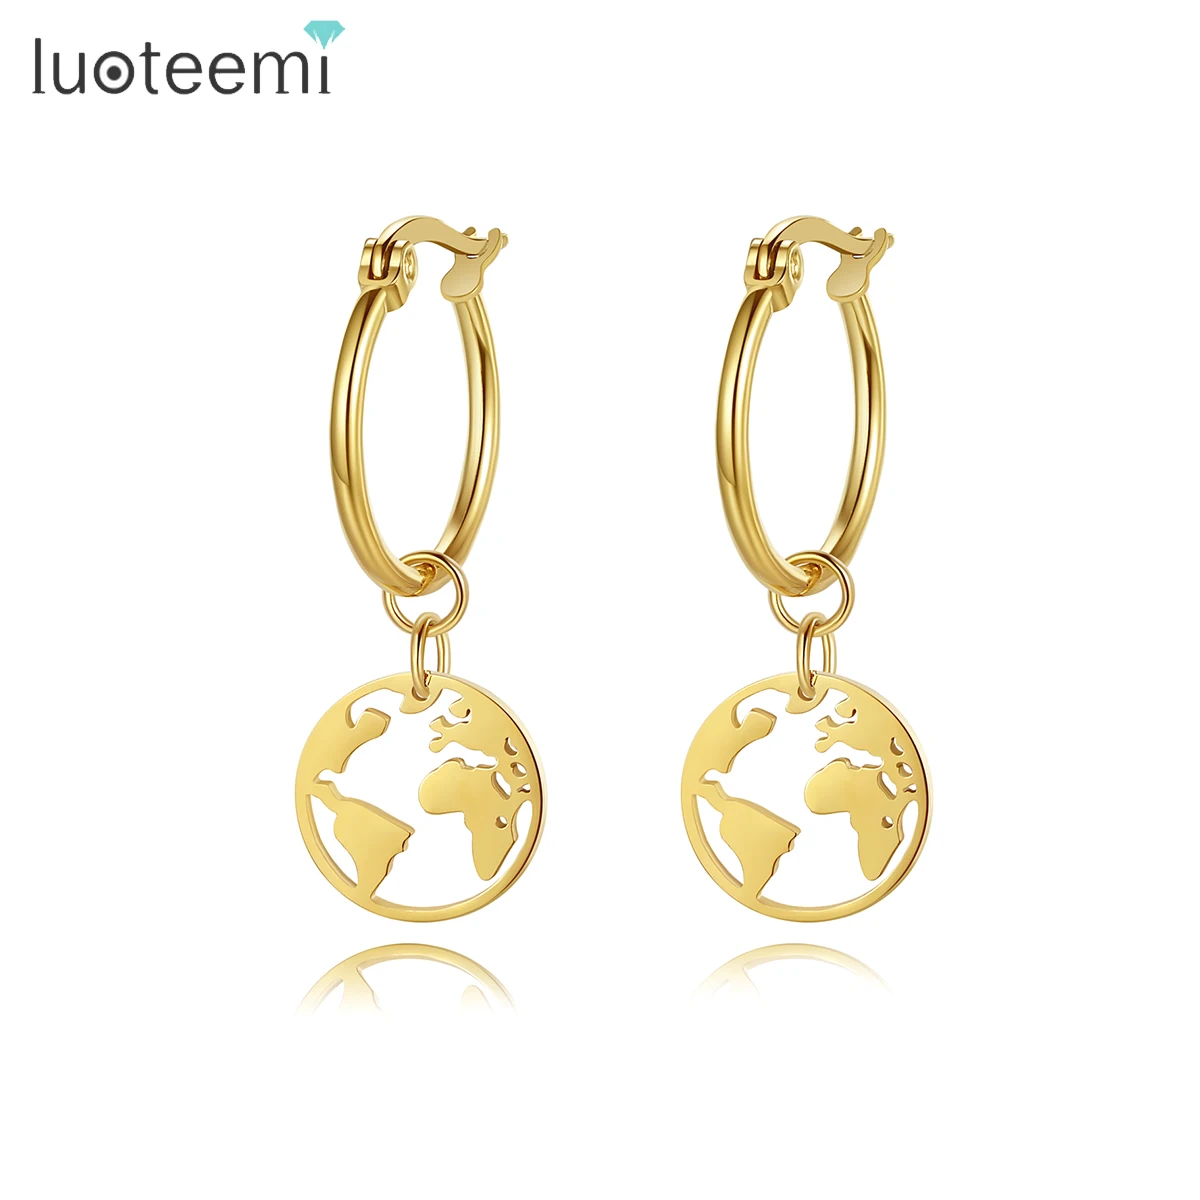 

SP-LAM Fashion 2021 World Map Trend Woman Elegant Earing Gold Plated Stainless Steel Earring